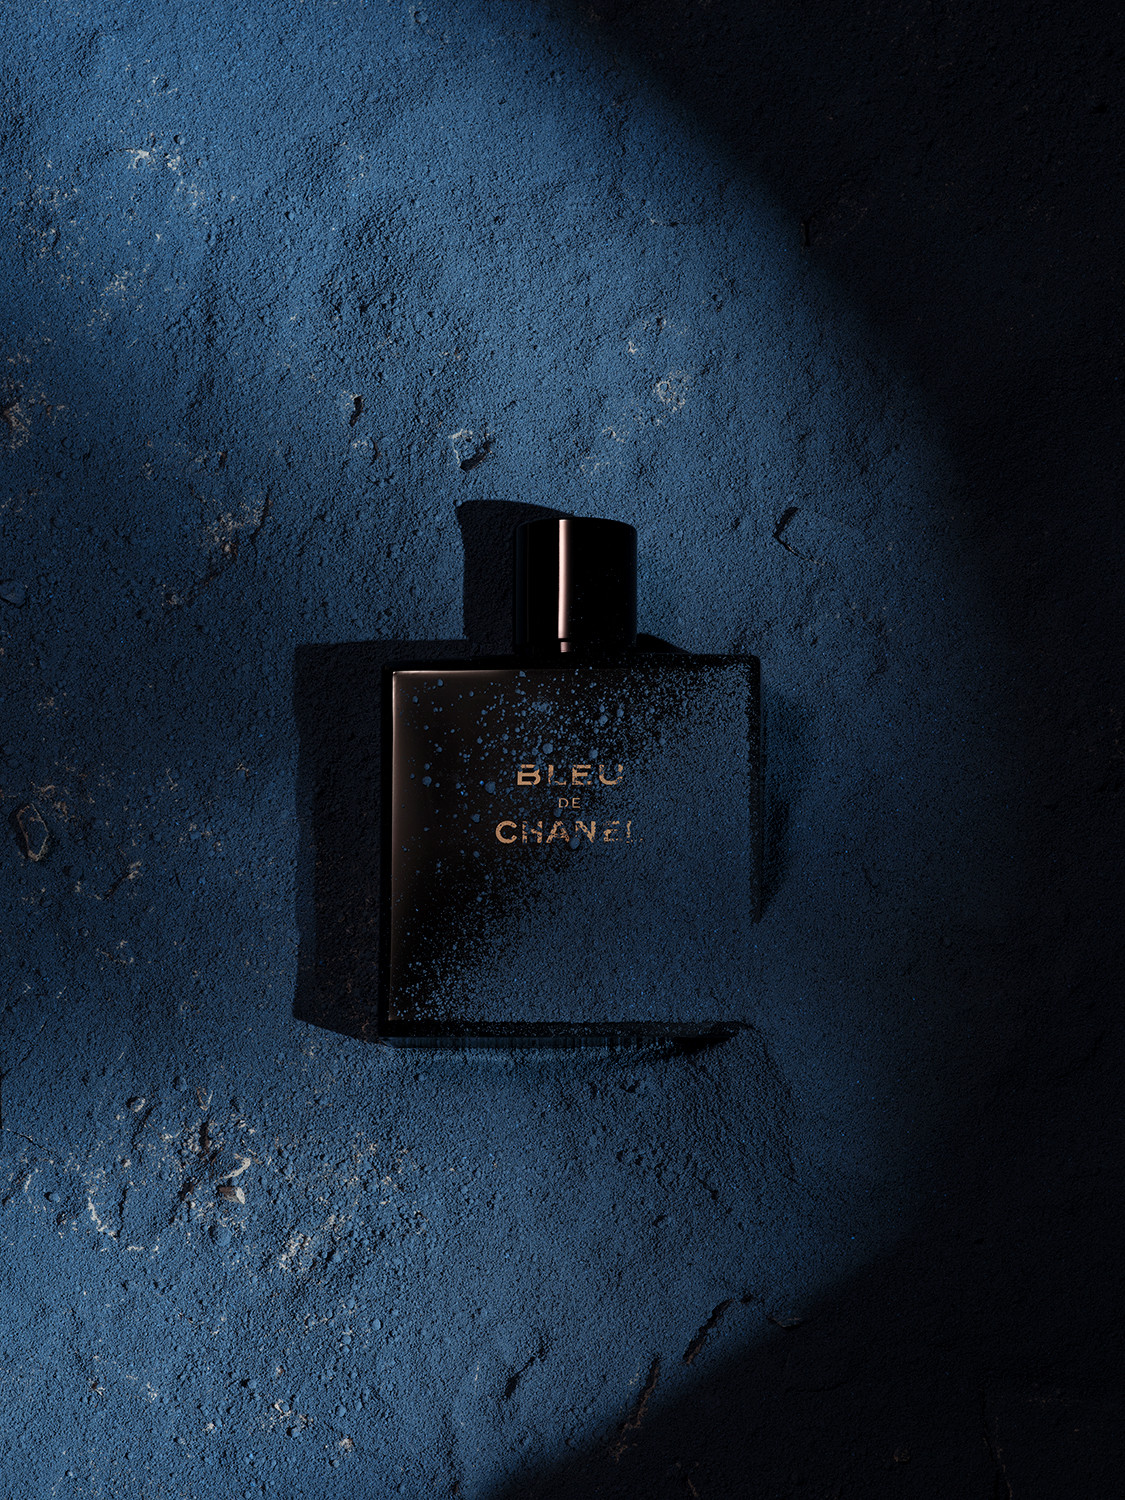 Inspired by Blue de Chanel - Insane Perfumes